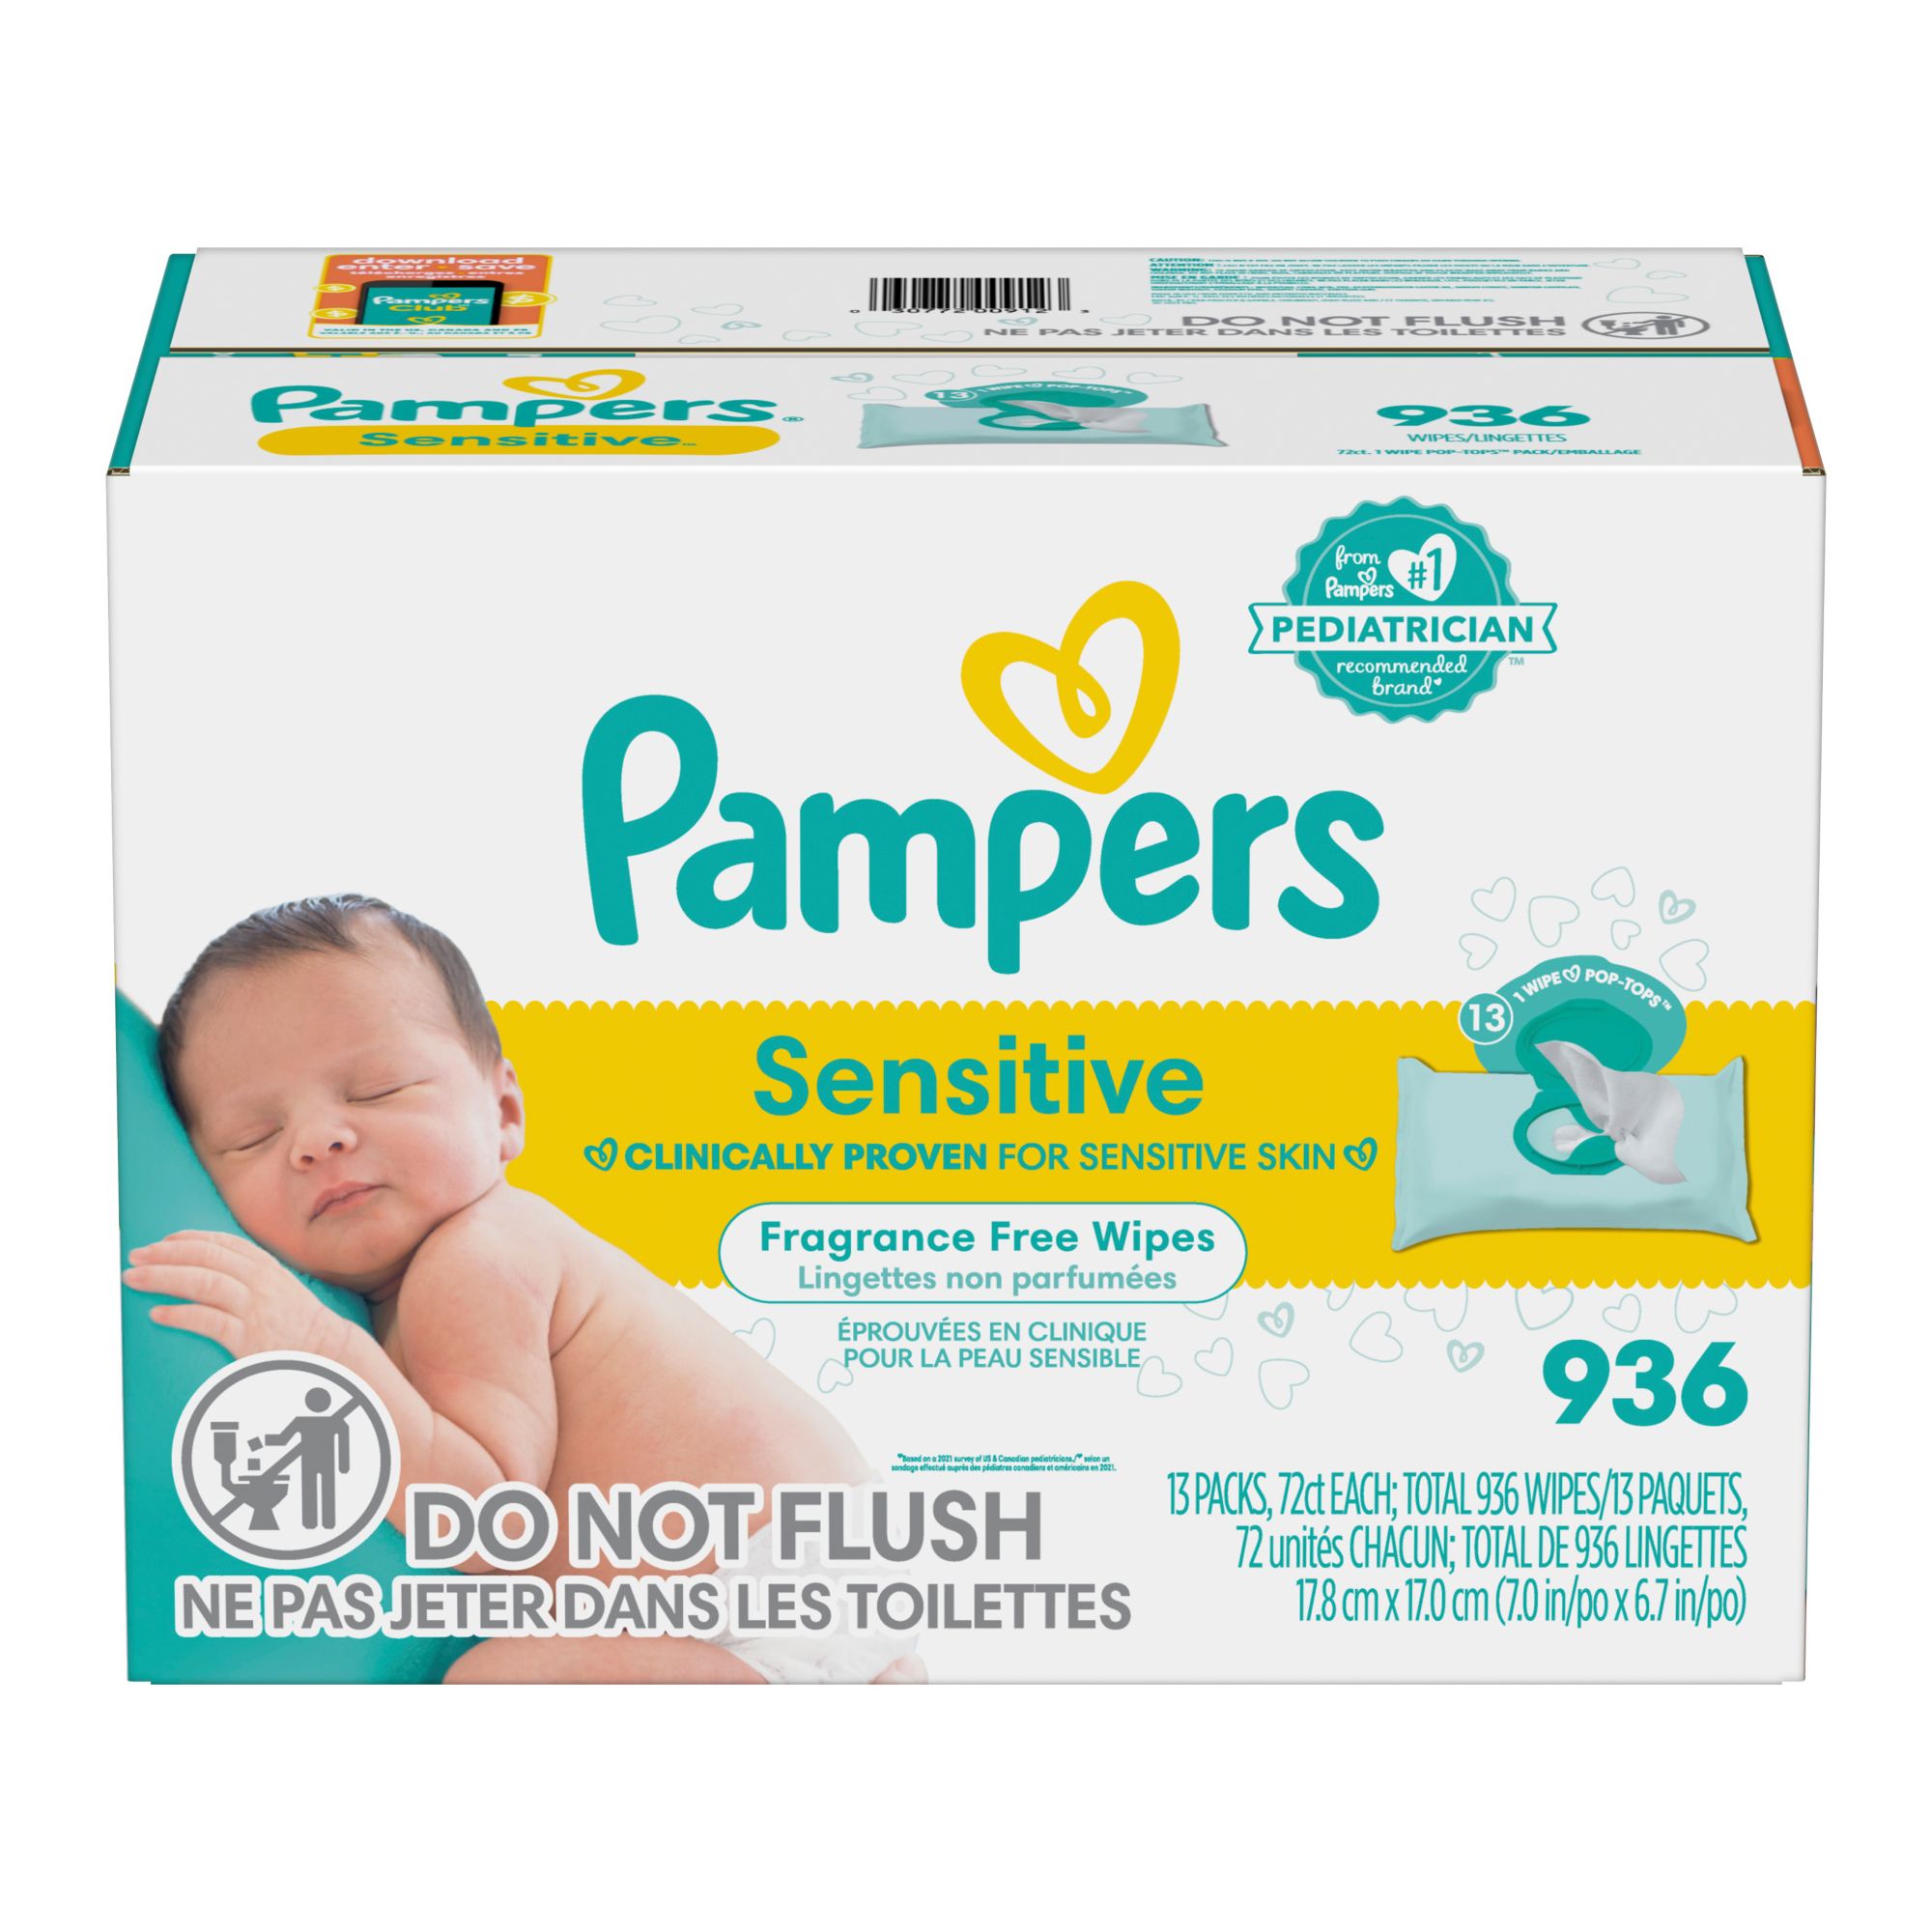 Pampers, Accessories, 3 Packs Pampers Size 6 63 Diapers Total Pampers  Baby Dry